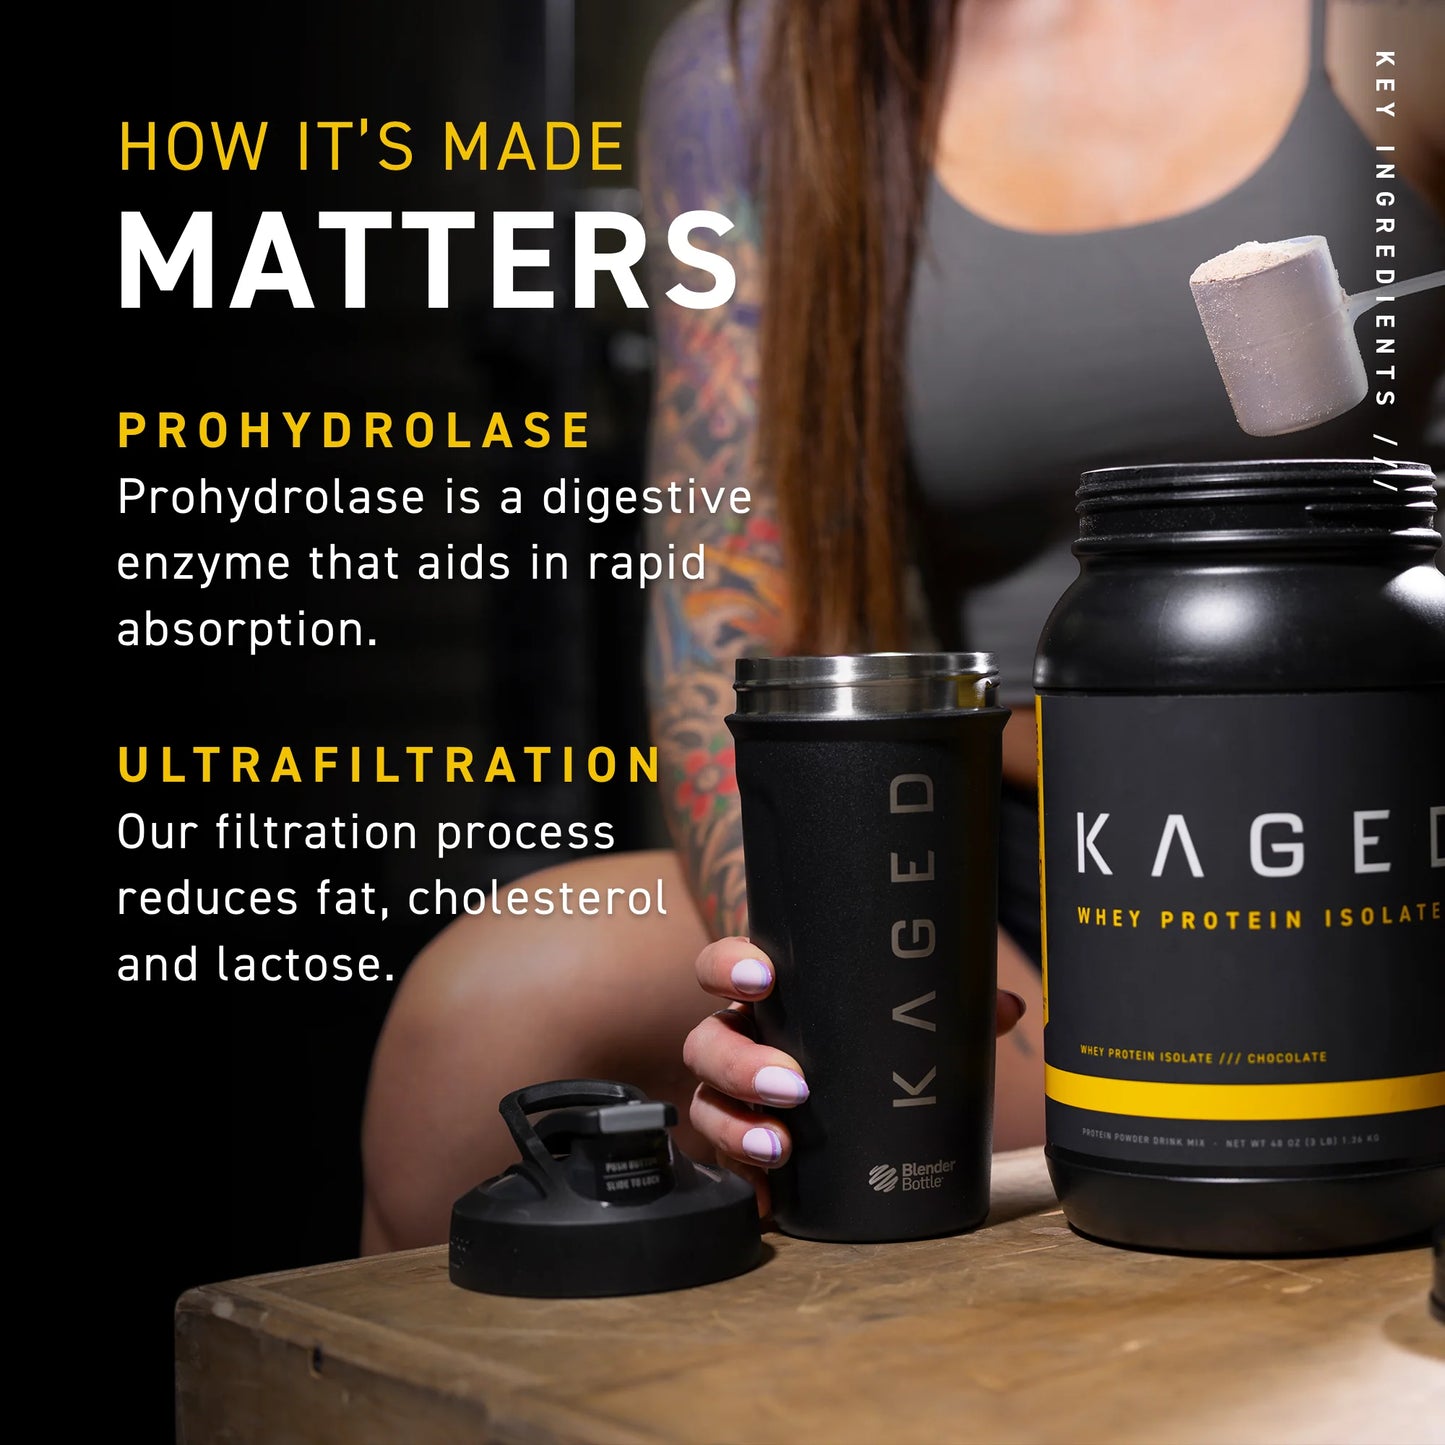 KAGED Whey Protein Isolate